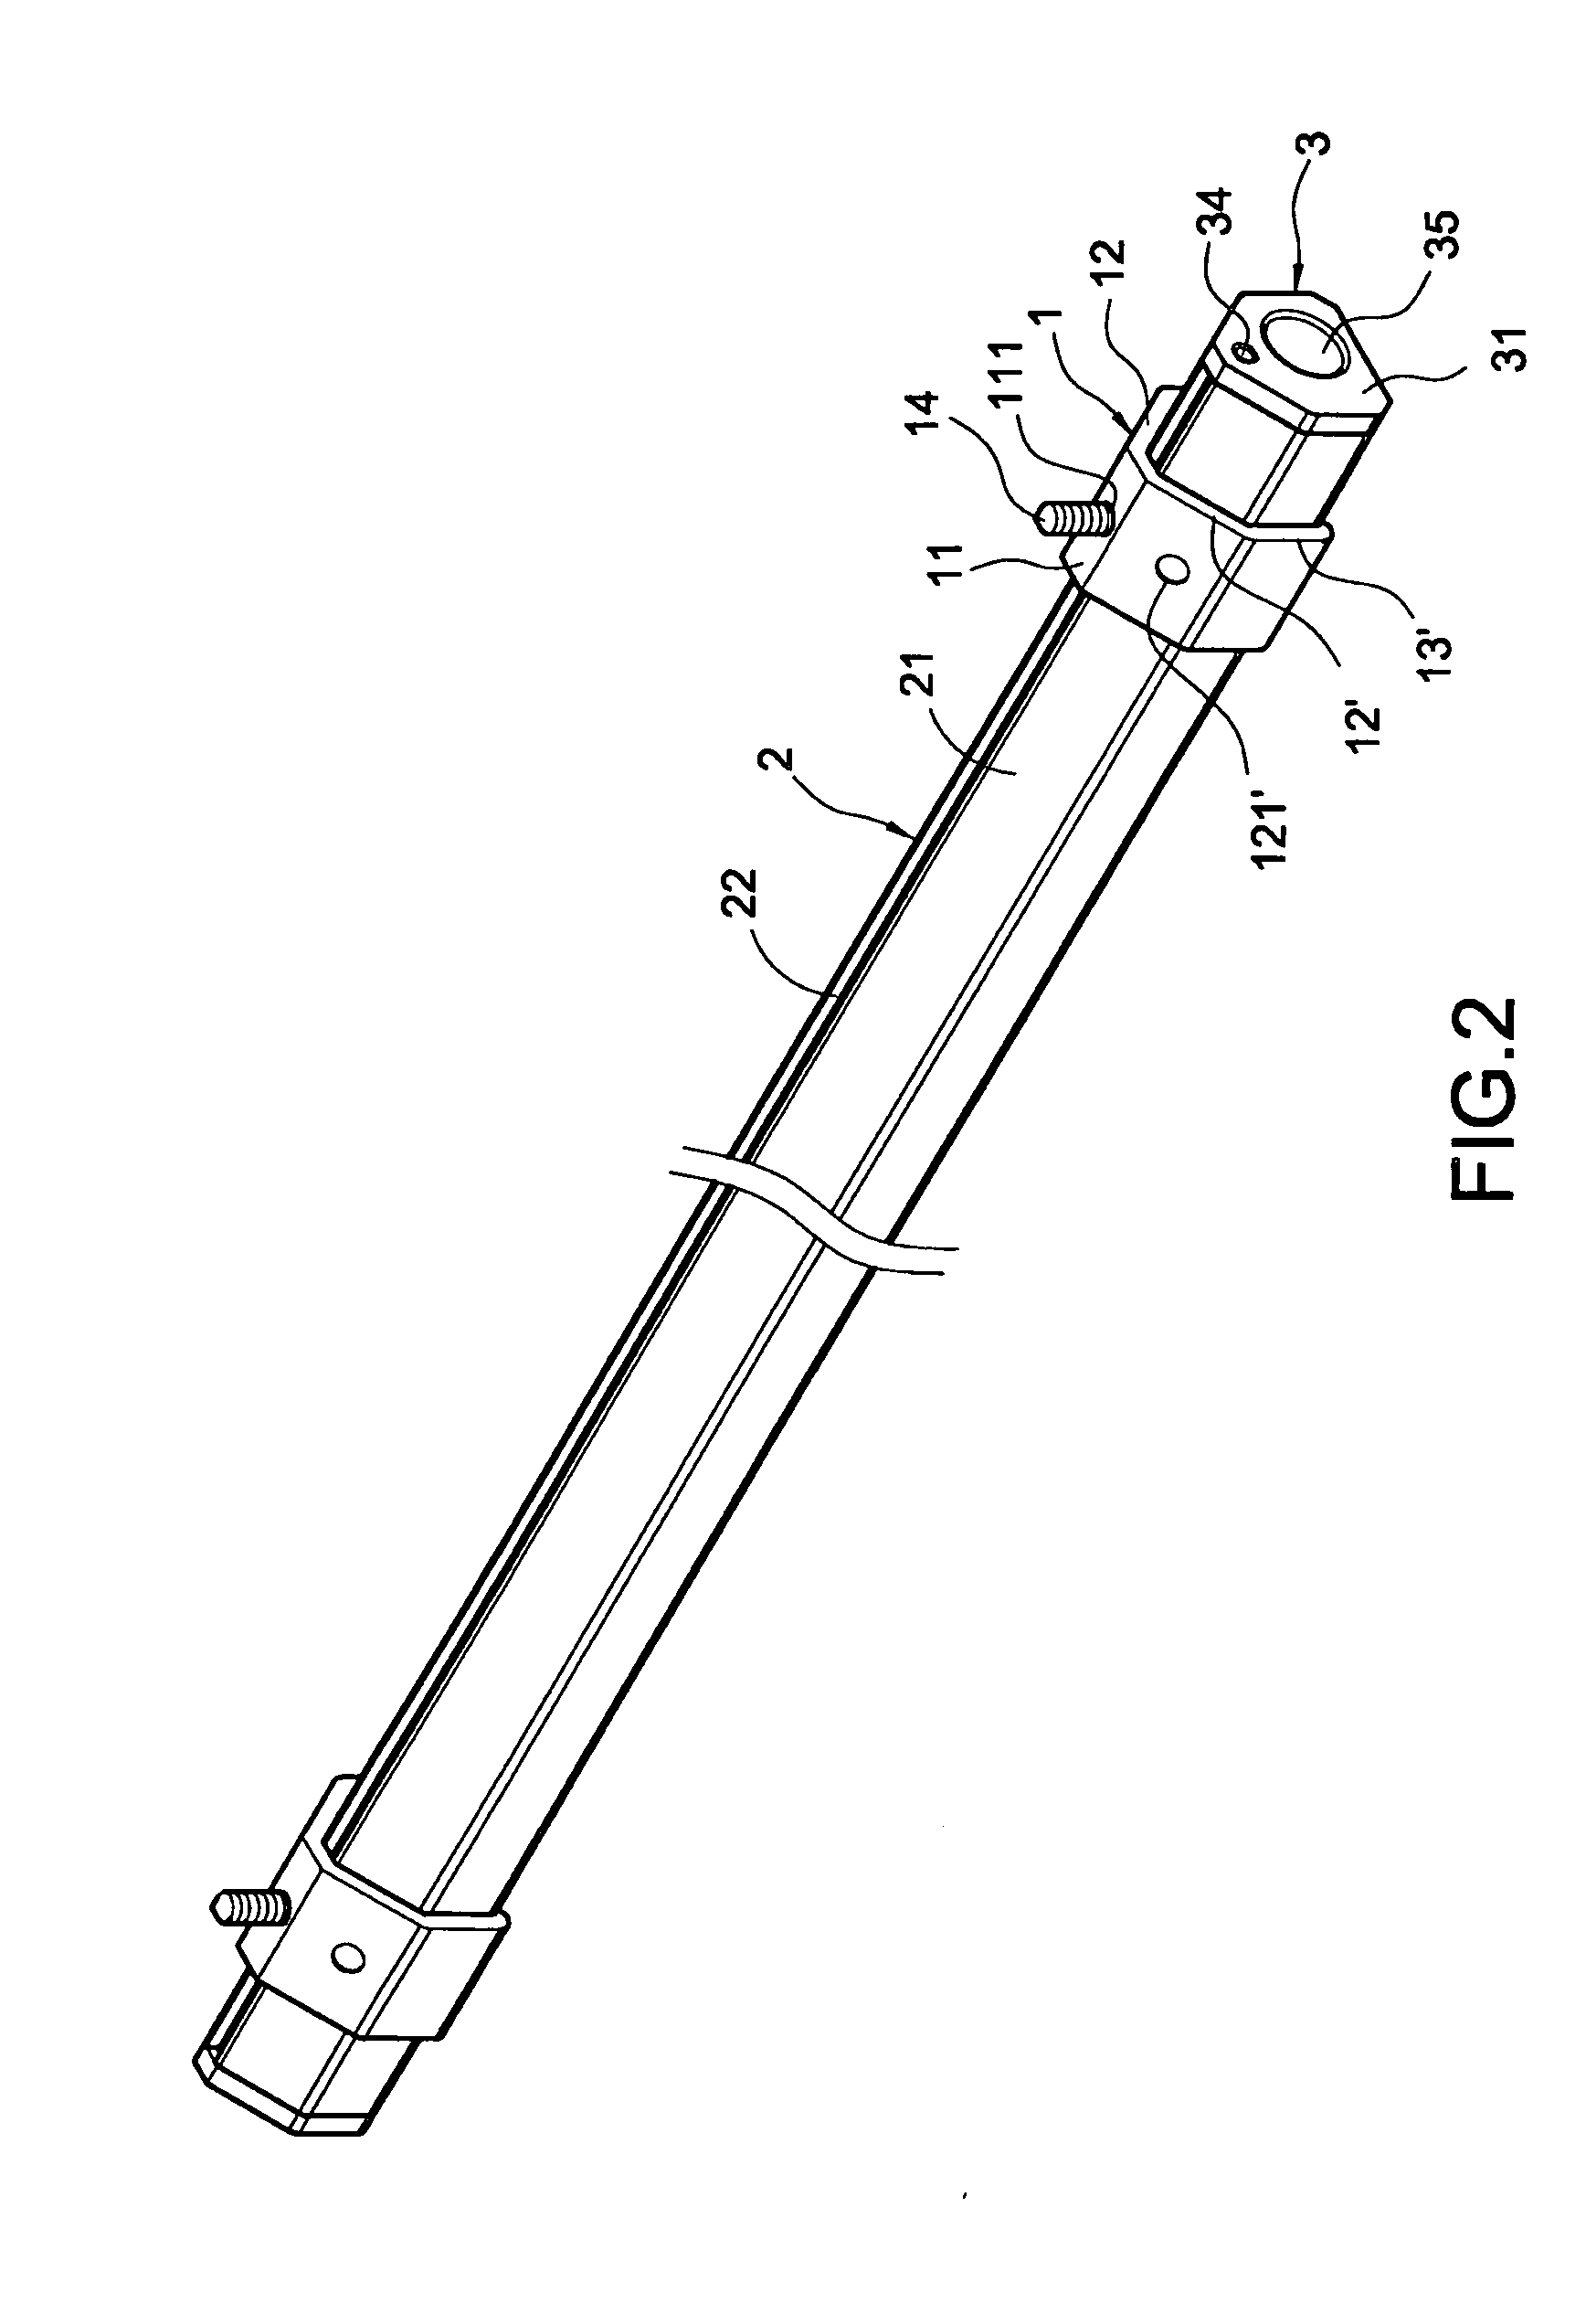 Assembly for fixing and connecting light bar lamp